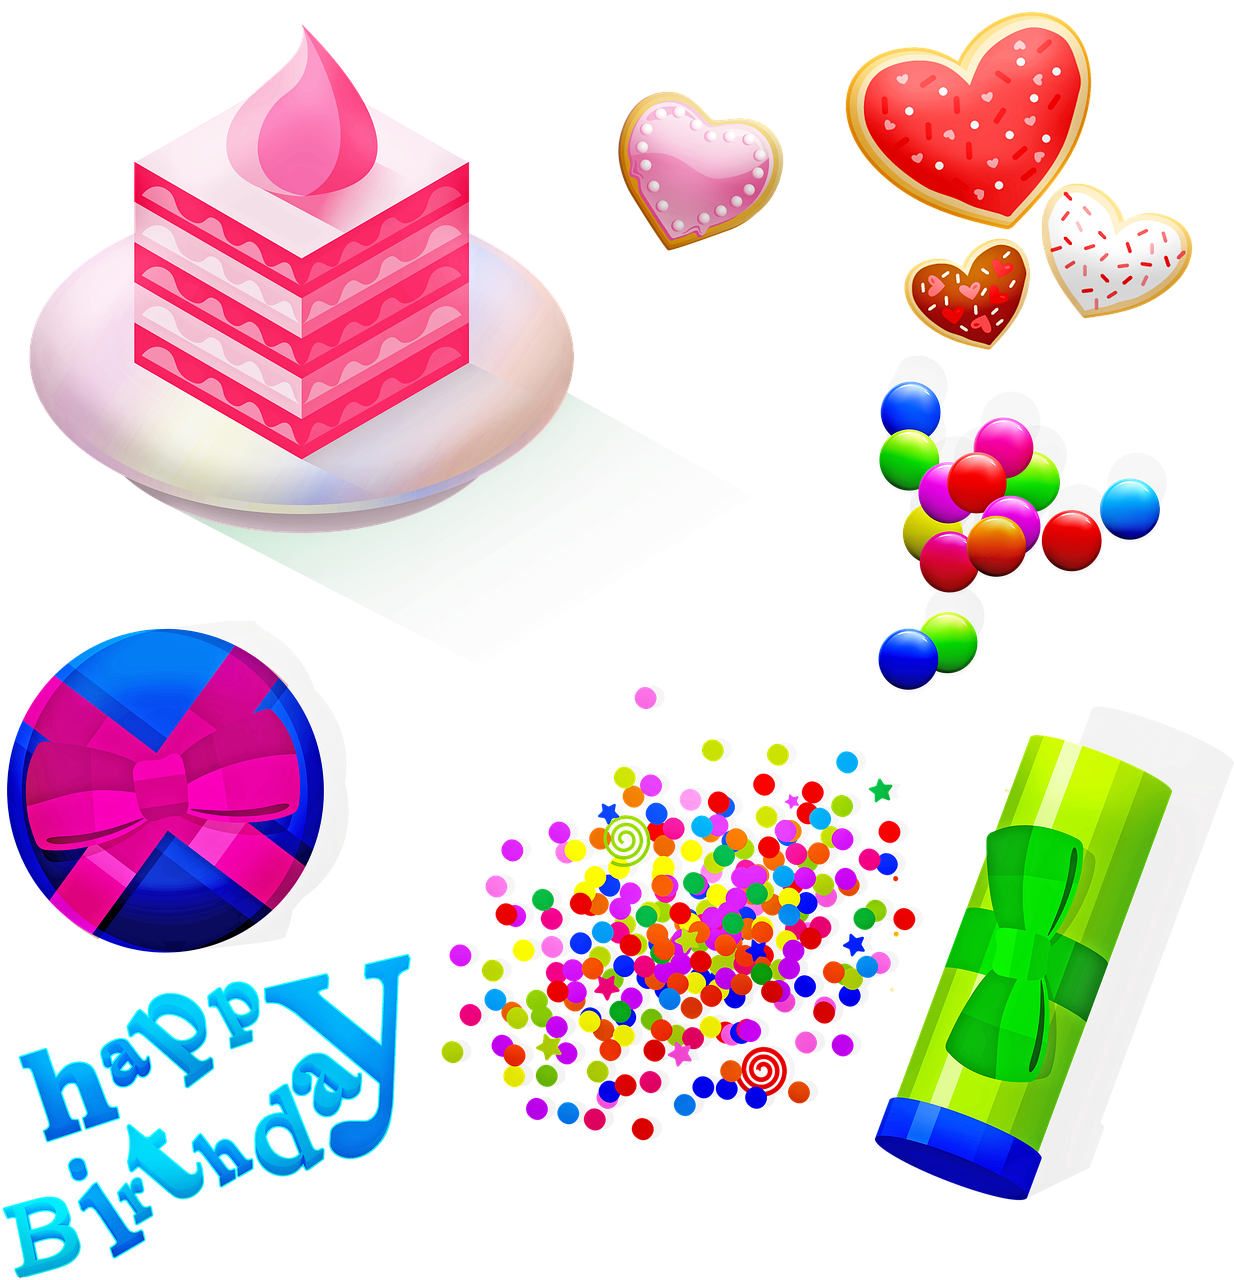 a piece of cake sitting on top of a plate, vector art, pixel art, party balloons, incredible isometric screenshot, various items, on a black background